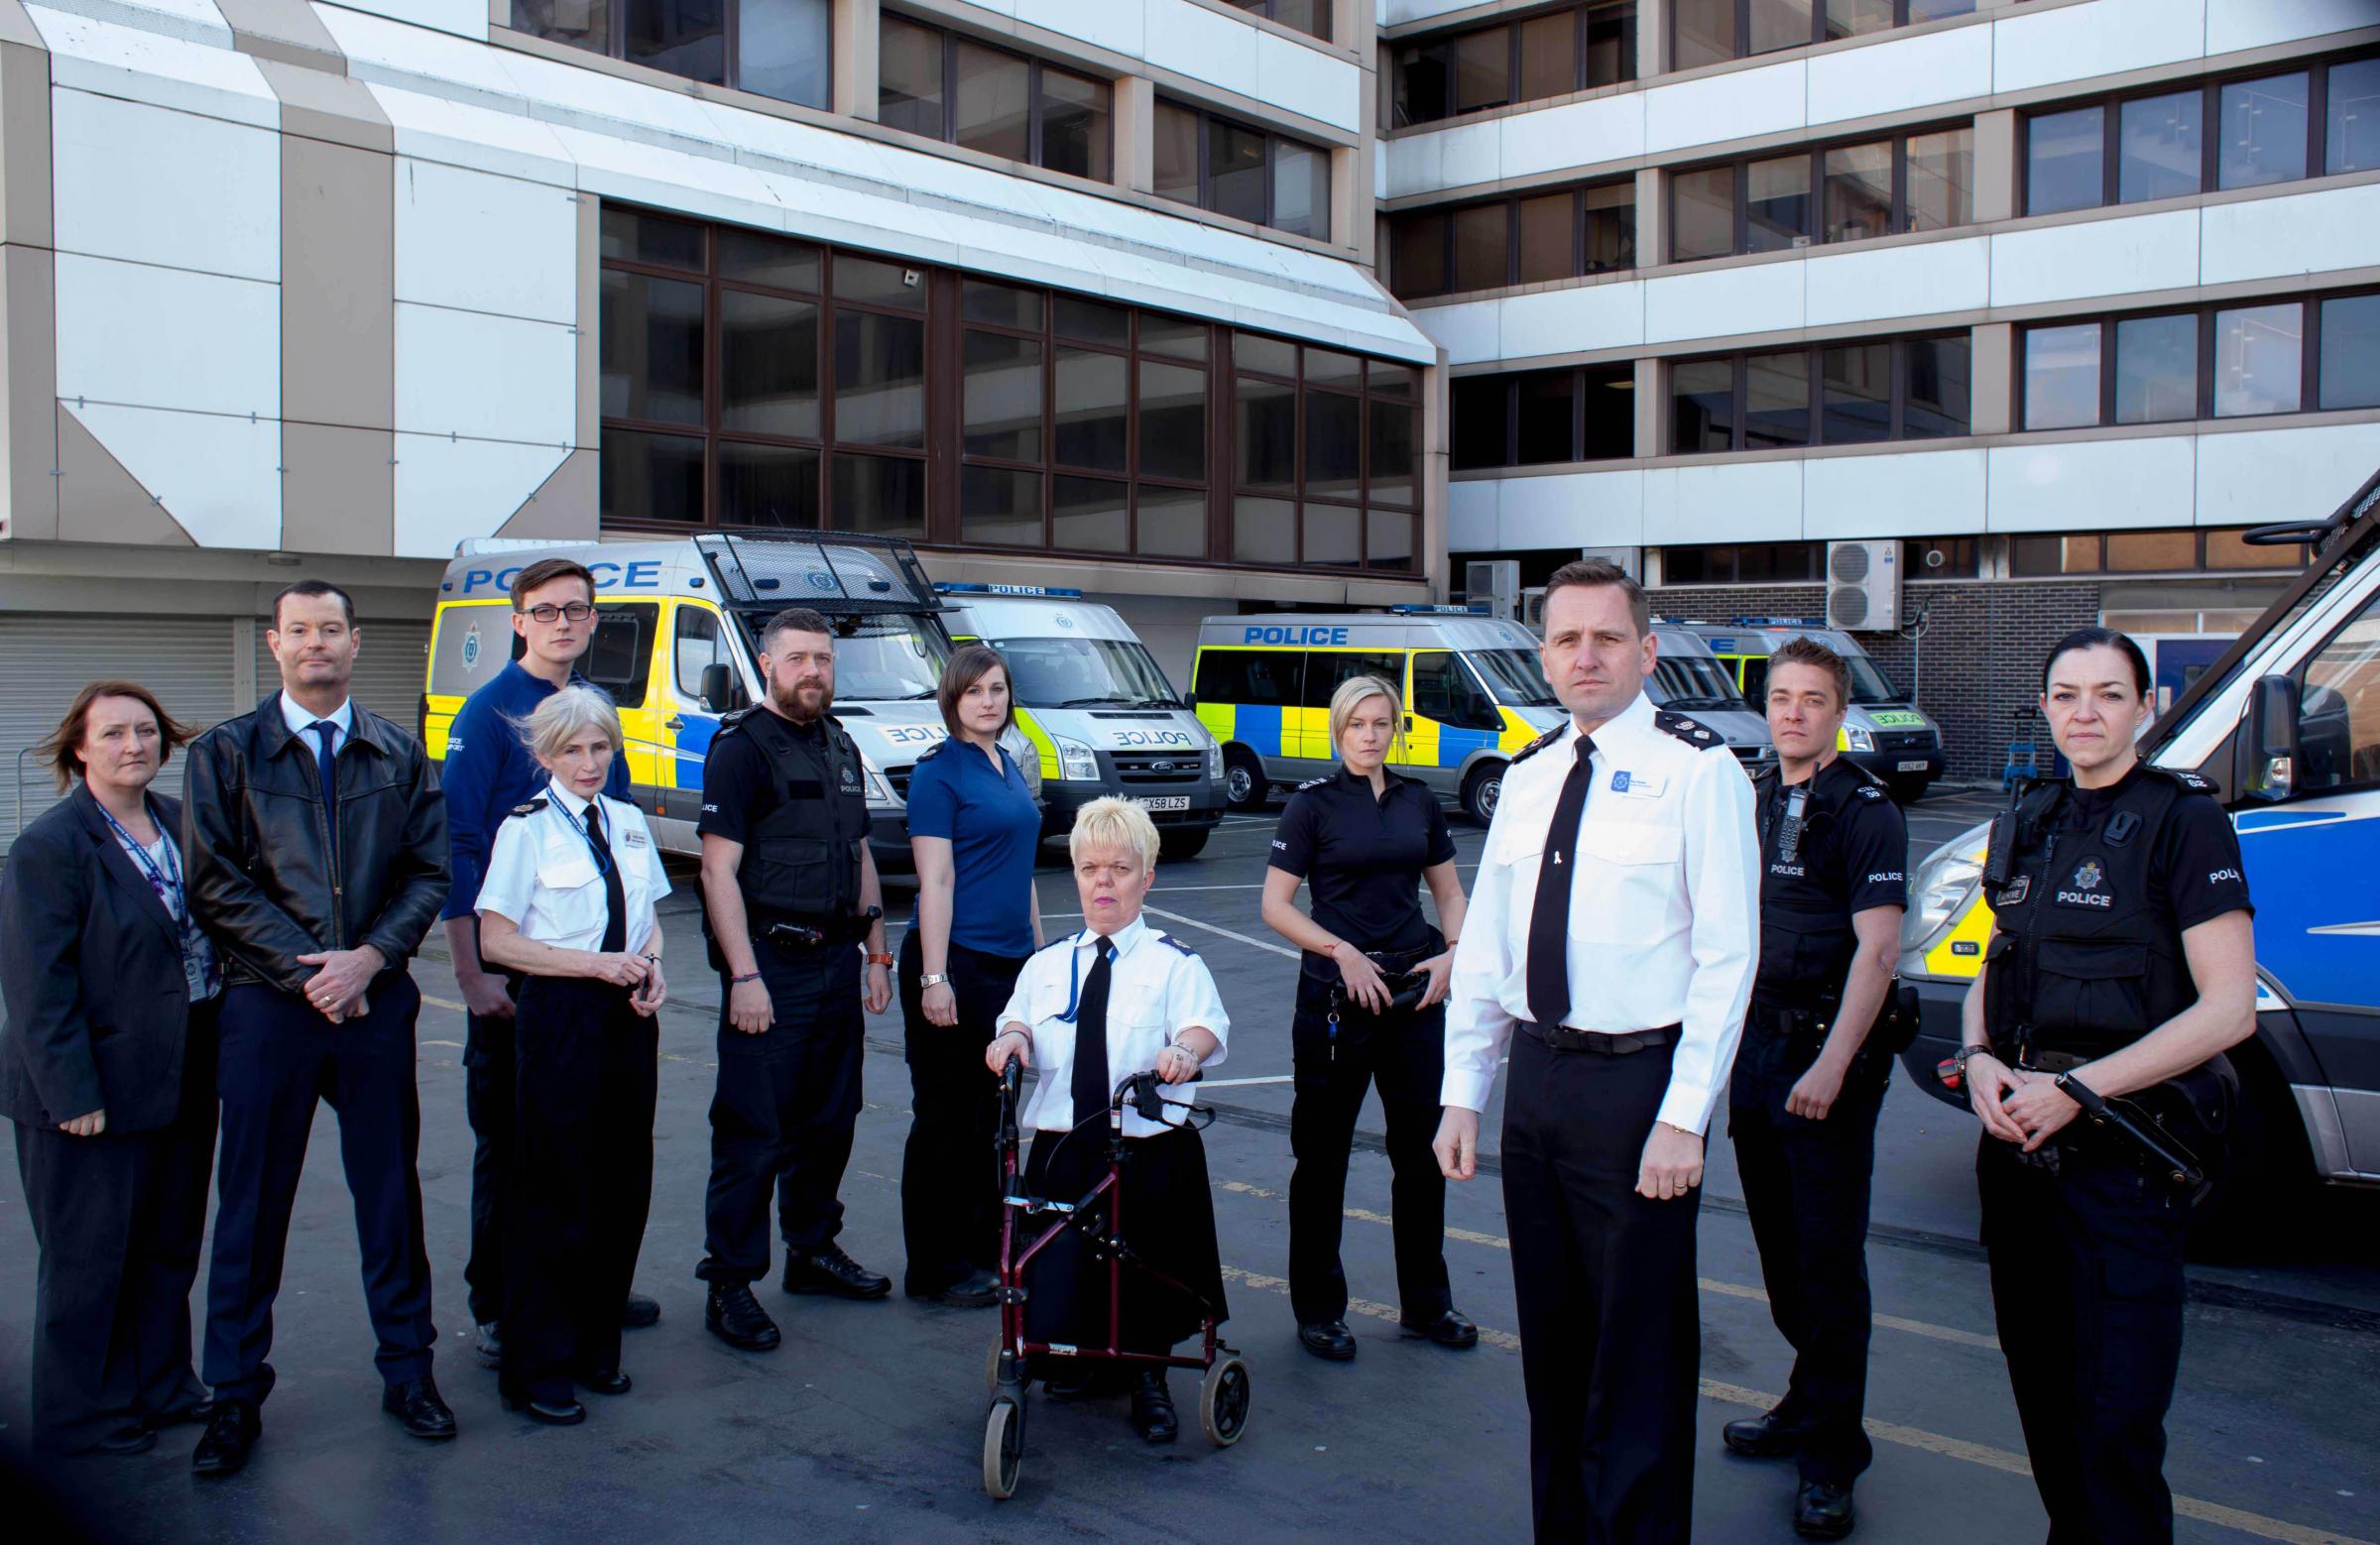 You're nicked! TV show captures day in the life of a bobby on the beat